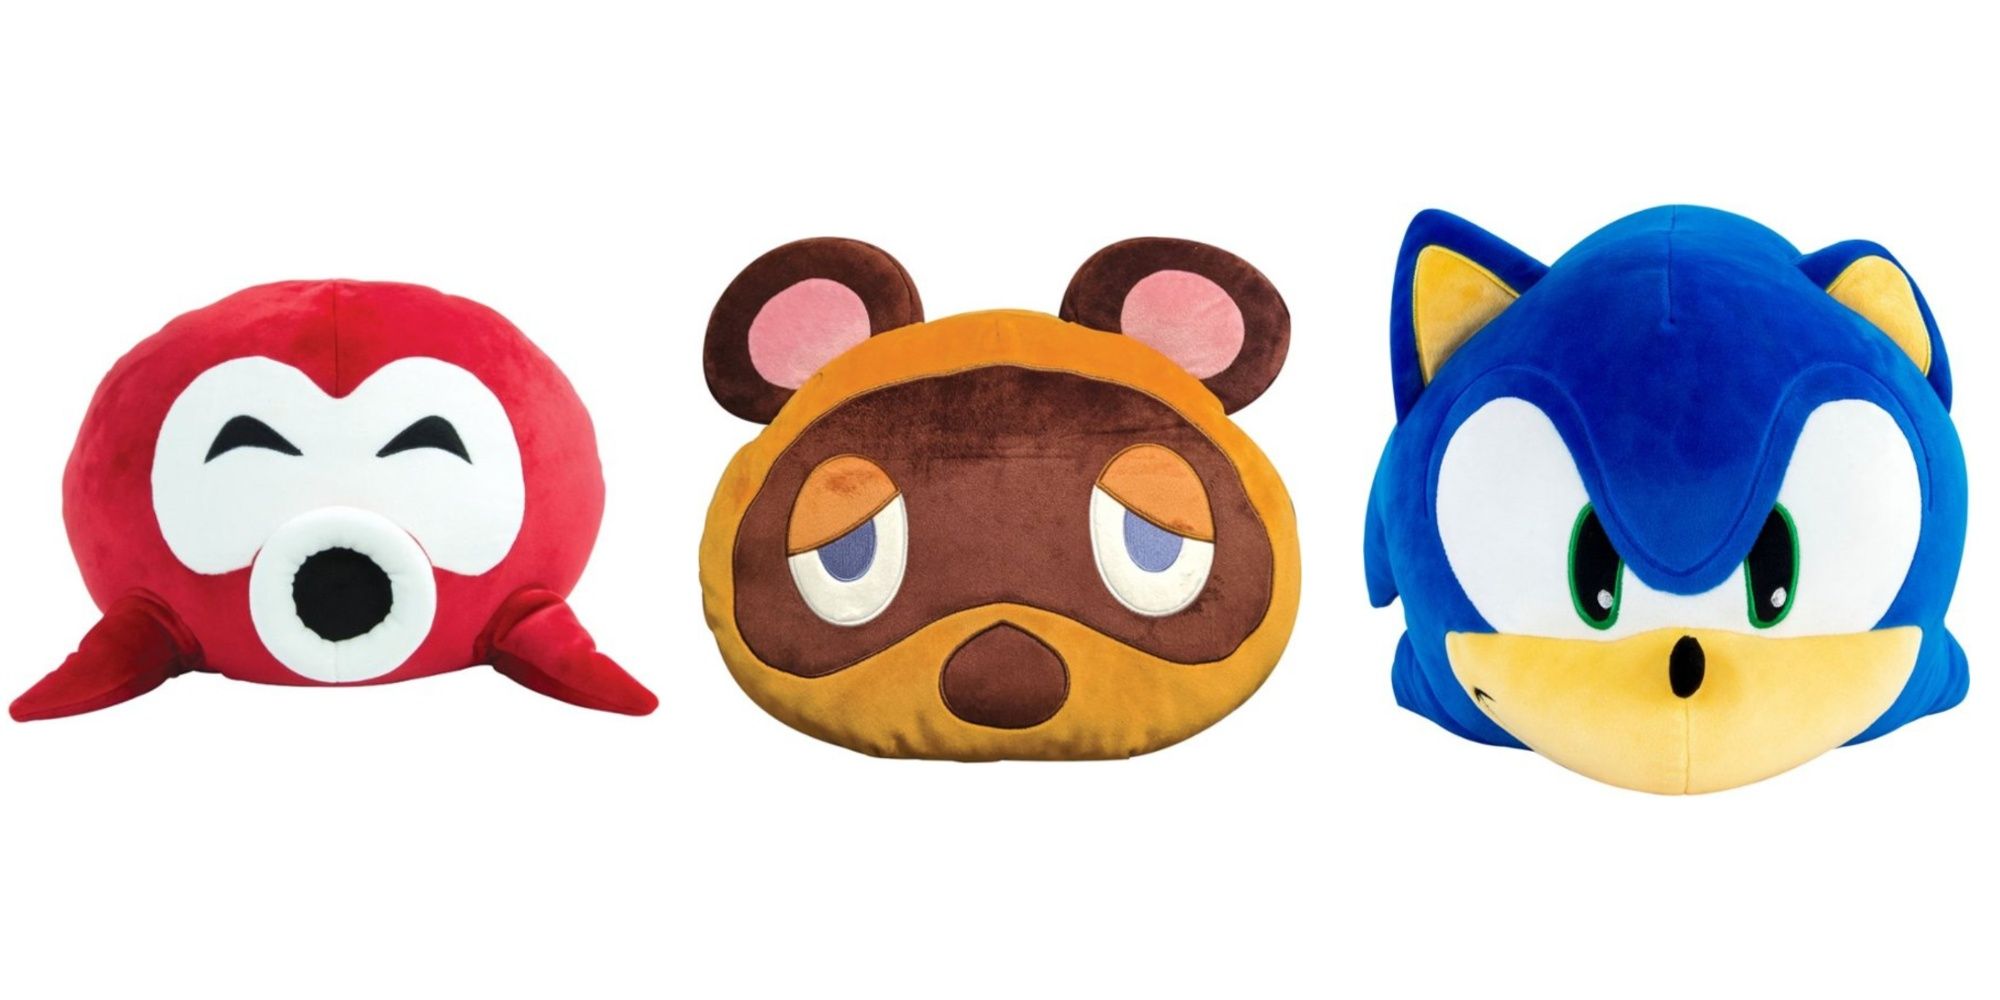 Octorock, Tom Nook and Sonic face plushes